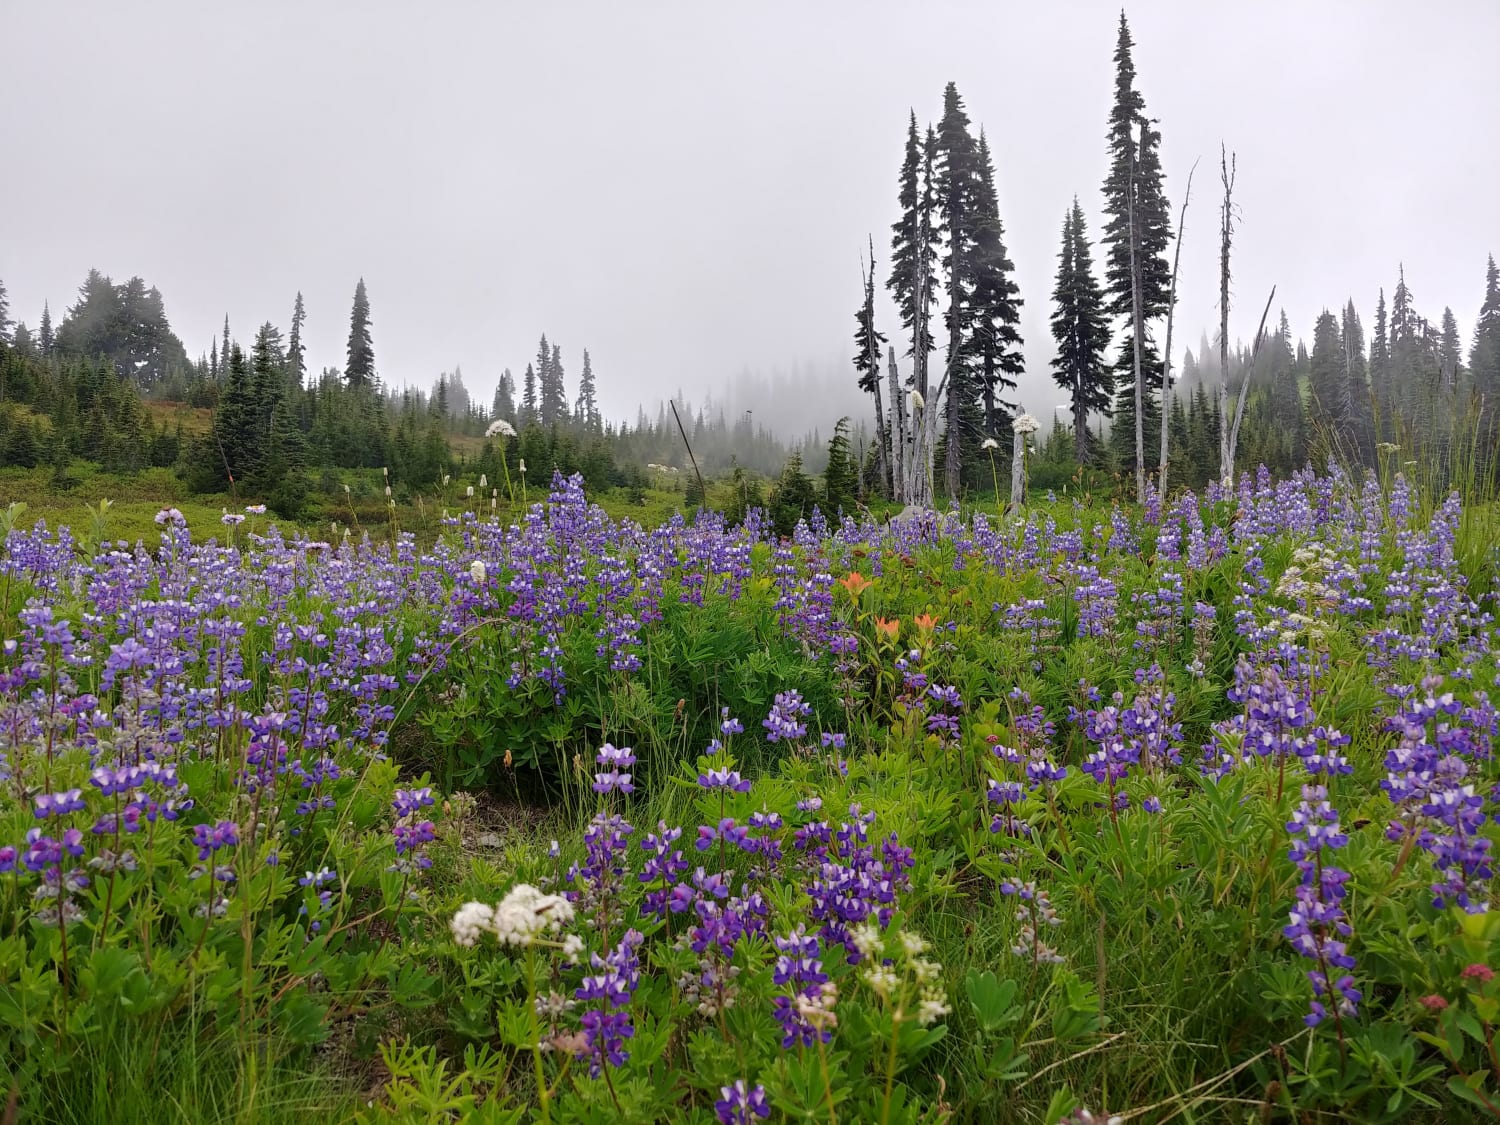 No view of Rainier when we hiked last summer, but cool wildflowers in the mist. Skyline Trail, Paradise, WA, USA.